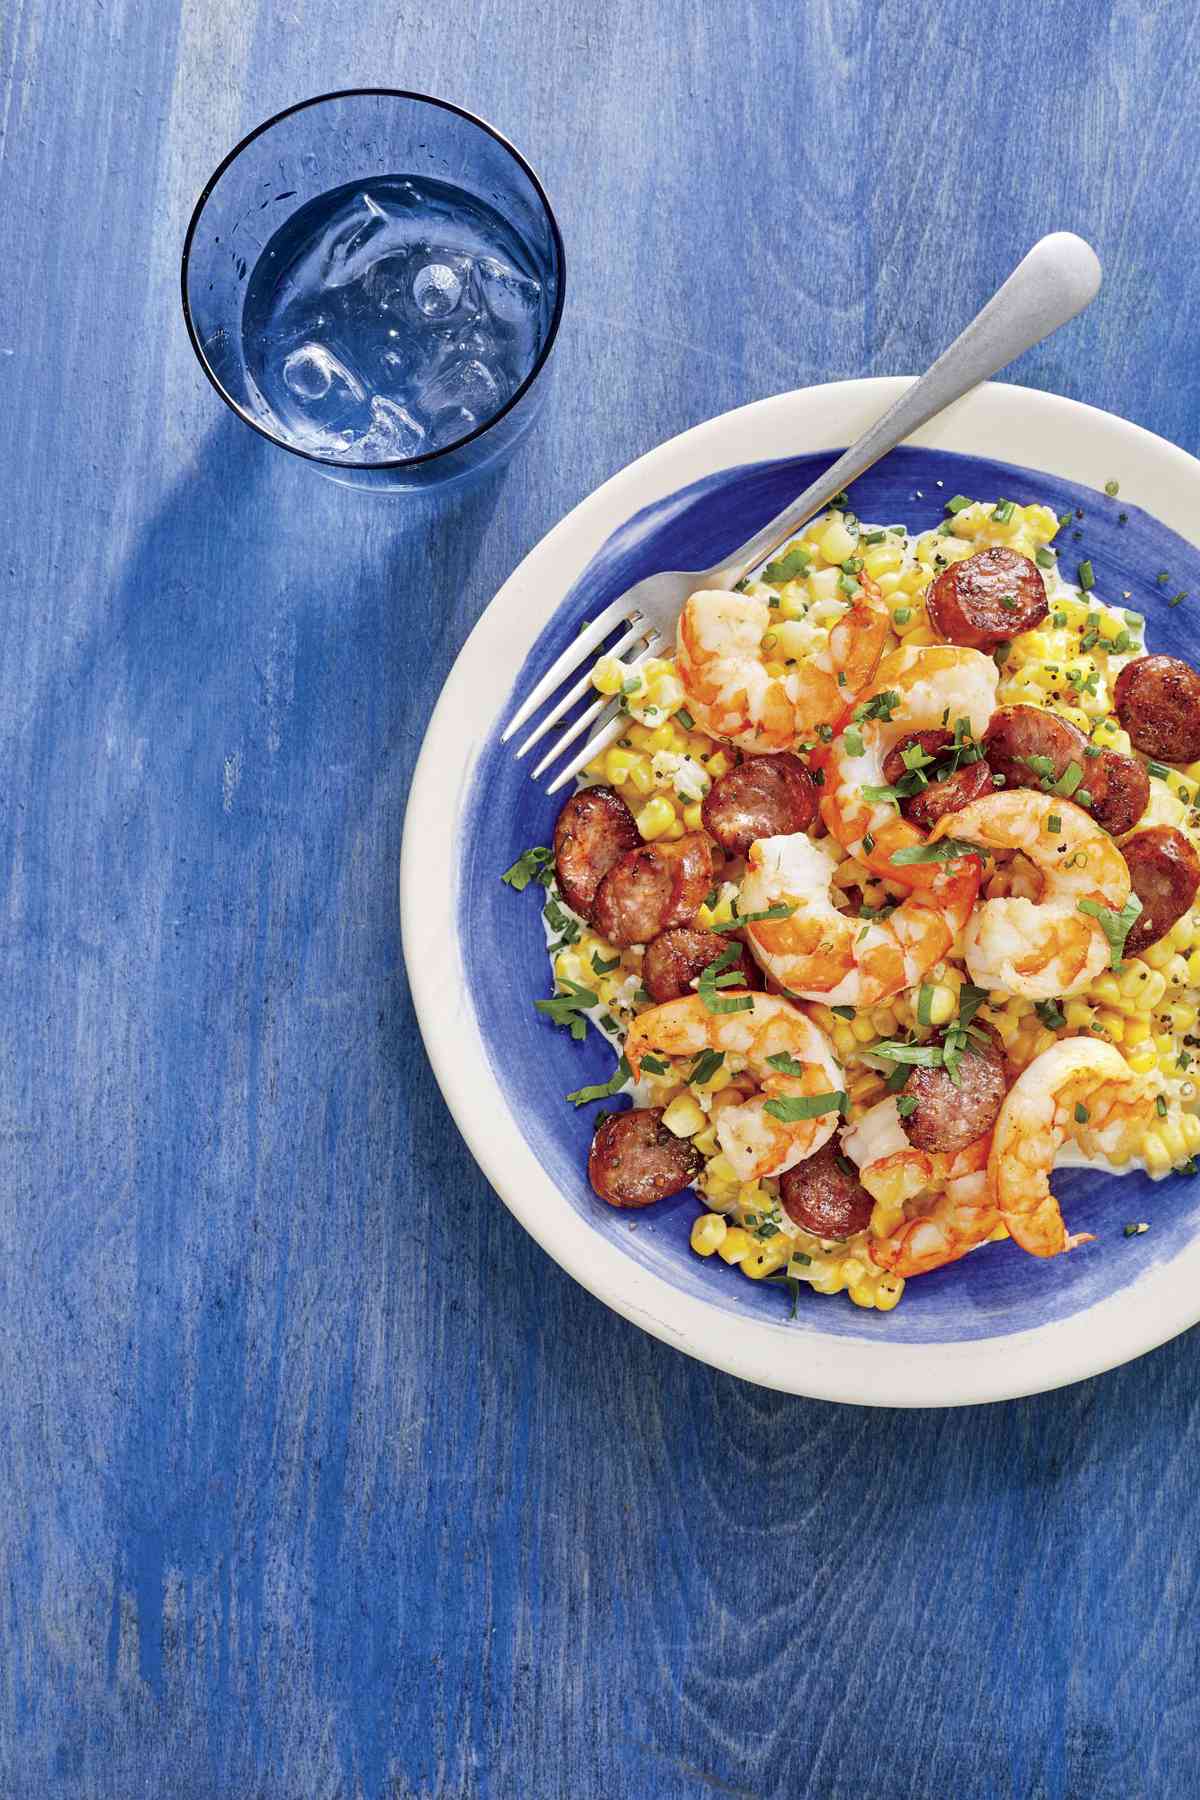 Skillet Corn with Shrimp and Sausage